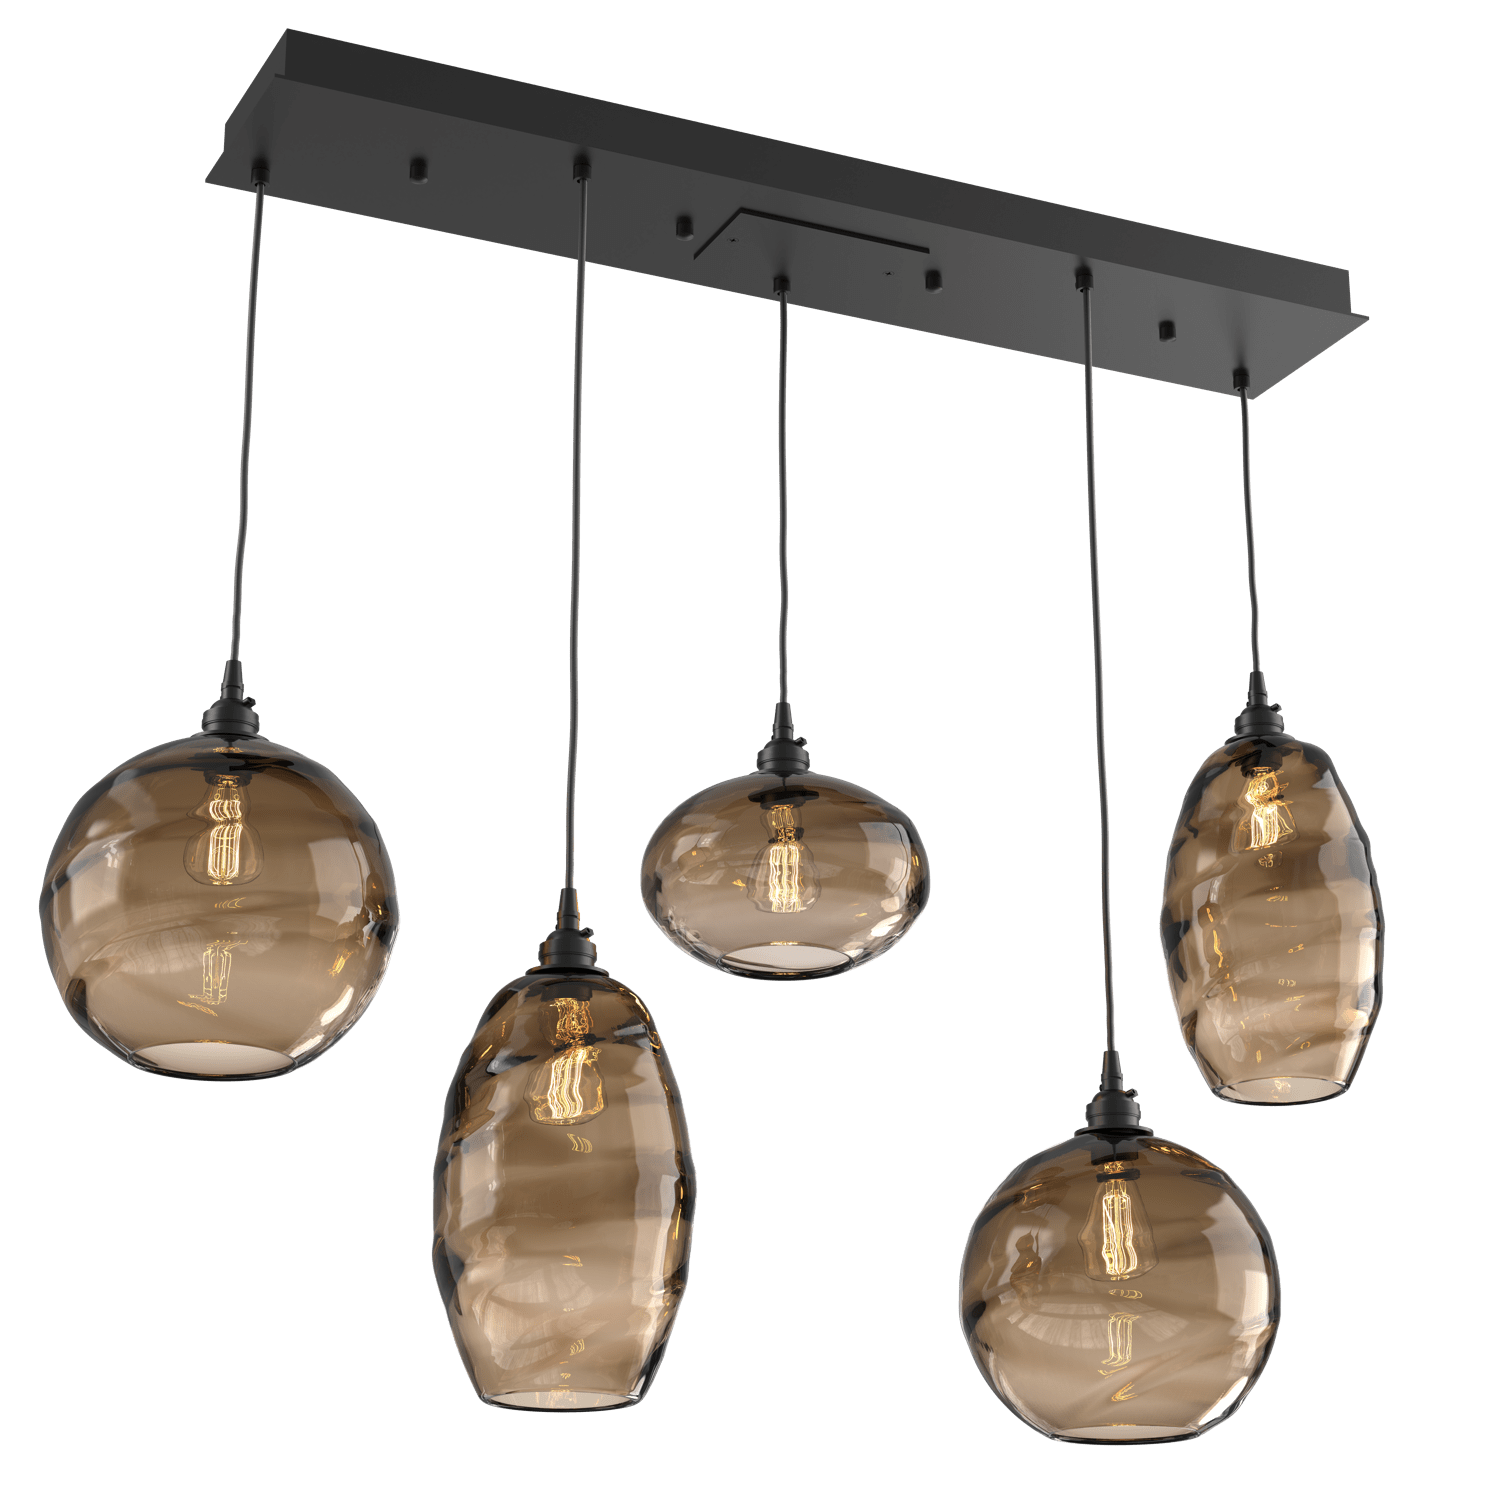 PLB0048-05-MB-OB-Hammerton-Studio-Optic-Blown-Glass-Misto-5-light-linear-pendant-chandelier-with-matte-black-finish-and-optic-bronze-blown-glass-shades-and-incandescent-lamping